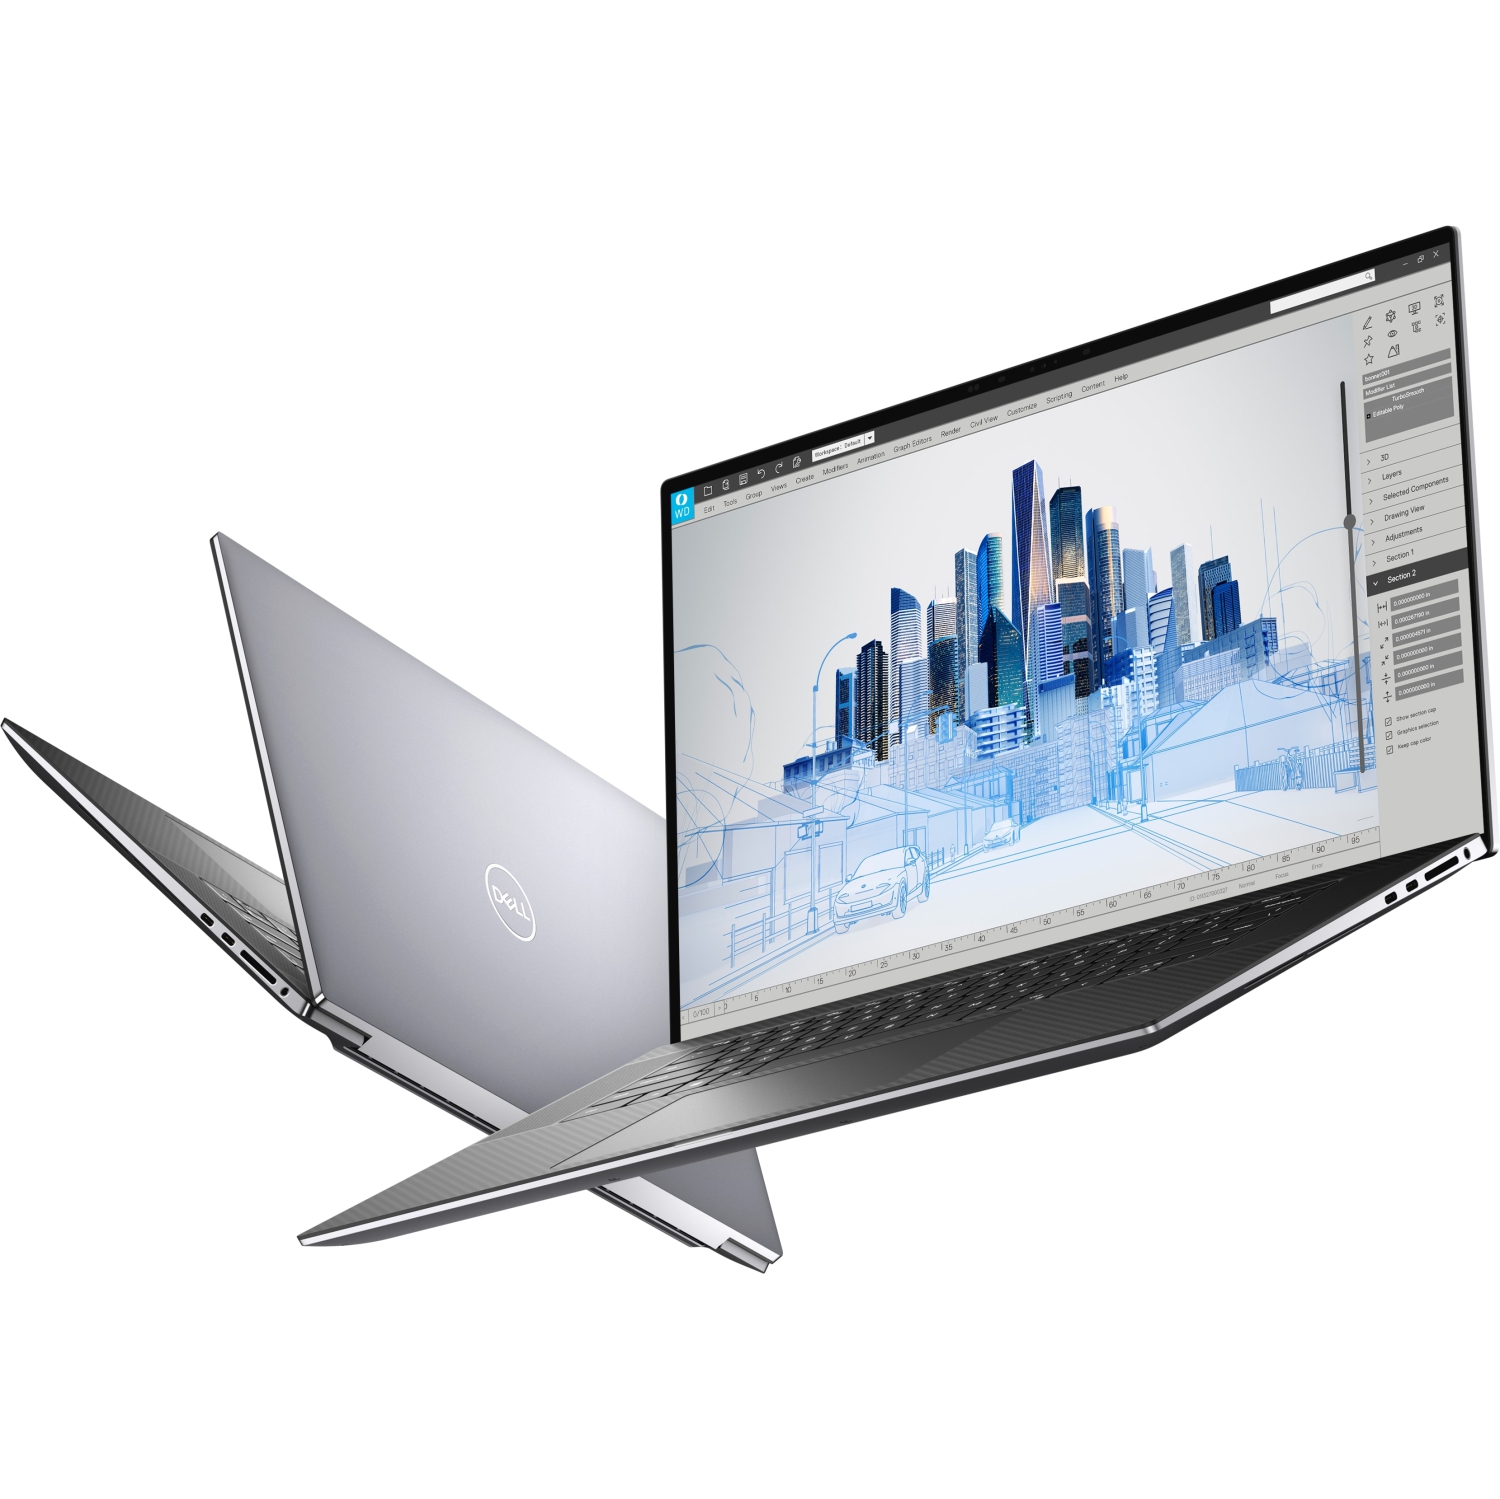 Refurbished (Excellent) - Dell Precision 5000 5760 Workstation Laptop (2021), 17" 4K Touch, Core i9, 4TB SSD, 64GB RAM, RTX A3000, 5 GHz, 11th Gen CPU Certified